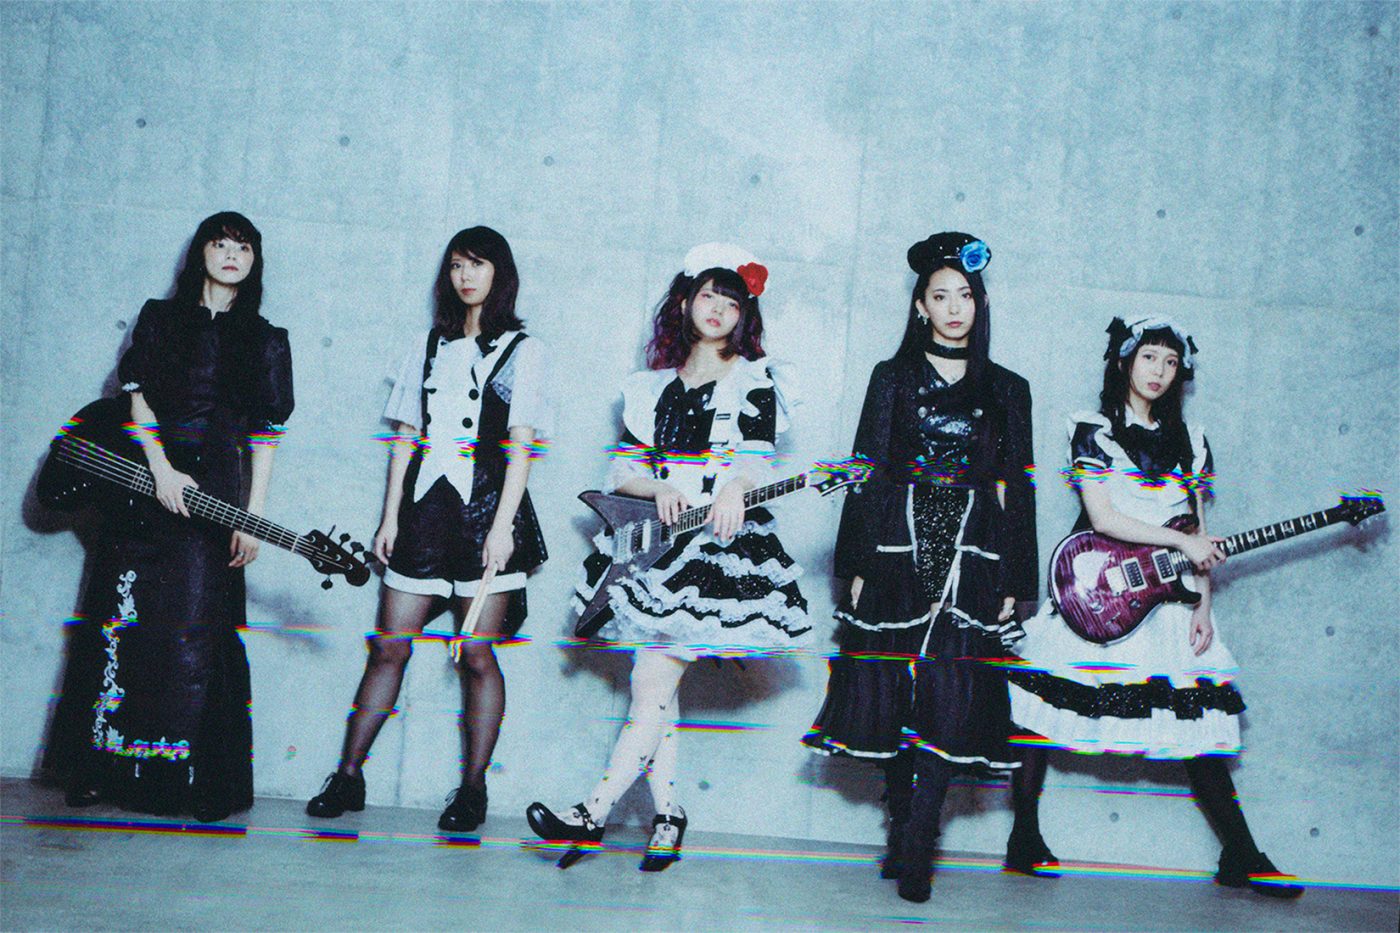 BAND-MAID、世界的ロックフェス『DOWNLOAD FESTIVAL』日本版への出演が決定